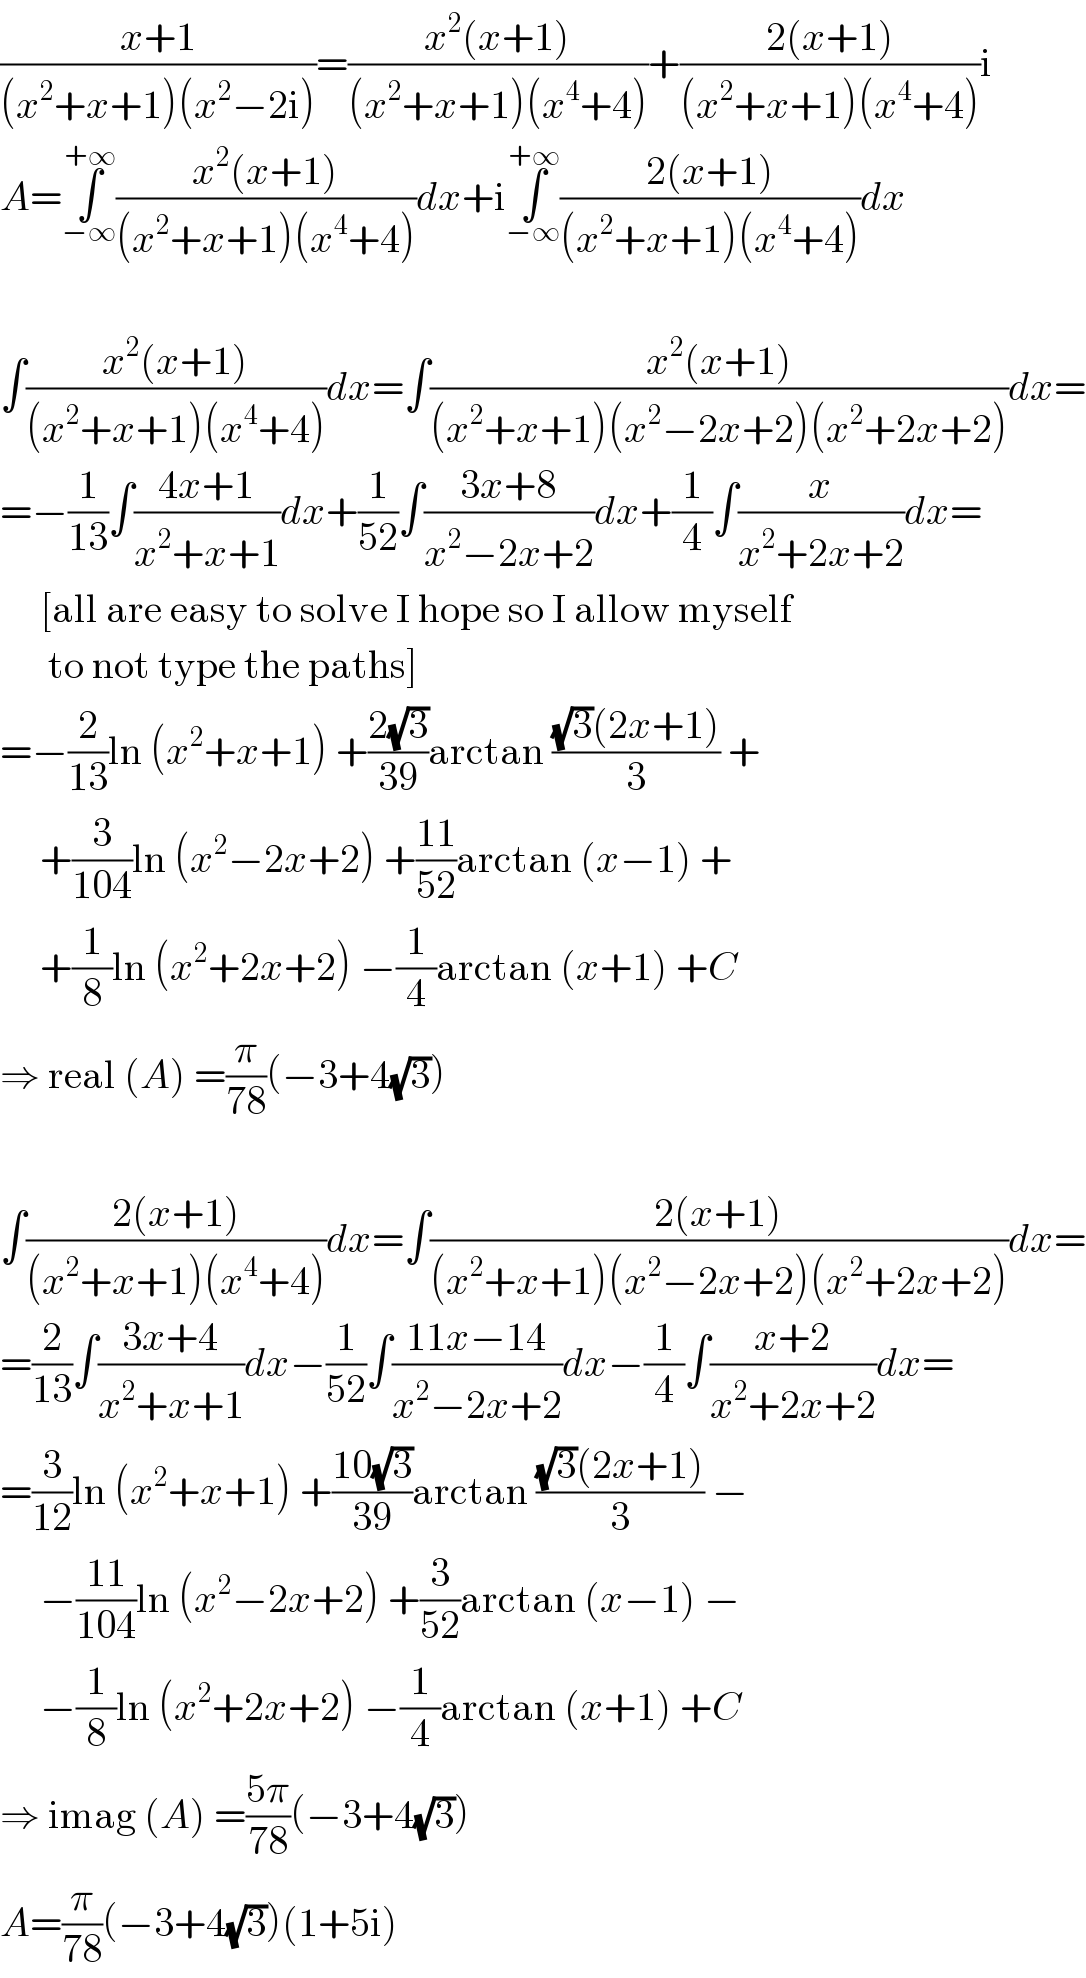 ((x+1)/((x^2 +x+1)(x^2 −2i)))=((x^2 (x+1))/((x^2 +x+1)(x^4 +4)))+((2(x+1))/((x^2 +x+1)(x^4 +4)))i  A=∫_(−∞) ^(+∞) ((x^2 (x+1))/((x^2 +x+1)(x^4 +4)))dx+i∫_(−∞) ^(+∞) ((2(x+1))/((x^2 +x+1)(x^4 +4)))dx    ∫((x^2 (x+1))/((x^2 +x+1)(x^4 +4)))dx=∫((x^2 (x+1))/((x^2 +x+1)(x^2 −2x+2)(x^2 +2x+2)))dx=  =−(1/(13))∫((4x+1)/(x^2 +x+1))dx+(1/(52))∫((3x+8)/(x^2 −2x+2))dx+(1/4)∫(x/(x^2 +2x+2))dx=       [all are easy to solve I hope so I allow myself        to not type the paths]  =−(2/(13))ln (x^2 +x+1) +((2(√3))/(39))arctan (((√3)(2x+1))/3) +       +(3/(104))ln (x^2 −2x+2) +((11)/(52))arctan (x−1) +       +(1/8)ln (x^2 +2x+2) −(1/4)arctan (x+1) +C  ⇒ real (A) =(π/(78))(−3+4(√3))    ∫((2(x+1))/((x^2 +x+1)(x^4 +4)))dx=∫((2(x+1))/((x^2 +x+1)(x^2 −2x+2)(x^2 +2x+2)))dx=  =(2/(13))∫((3x+4)/(x^2 +x+1))dx−(1/(52))∫((11x−14)/(x^2 −2x+2))dx−(1/4)∫((x+2)/(x^2 +2x+2))dx=  =(3/(12))ln (x^2 +x+1) +((10(√3))/(39))arctan (((√3)(2x+1))/3) −       −((11)/(104))ln (x^2 −2x+2) +(3/(52))arctan (x−1) −       −(1/8)ln (x^2 +2x+2) −(1/4)arctan (x+1) +C  ⇒ imag (A) =((5π)/(78))(−3+4(√3))  A=(π/(78))(−3+4(√3))(1+5i)  